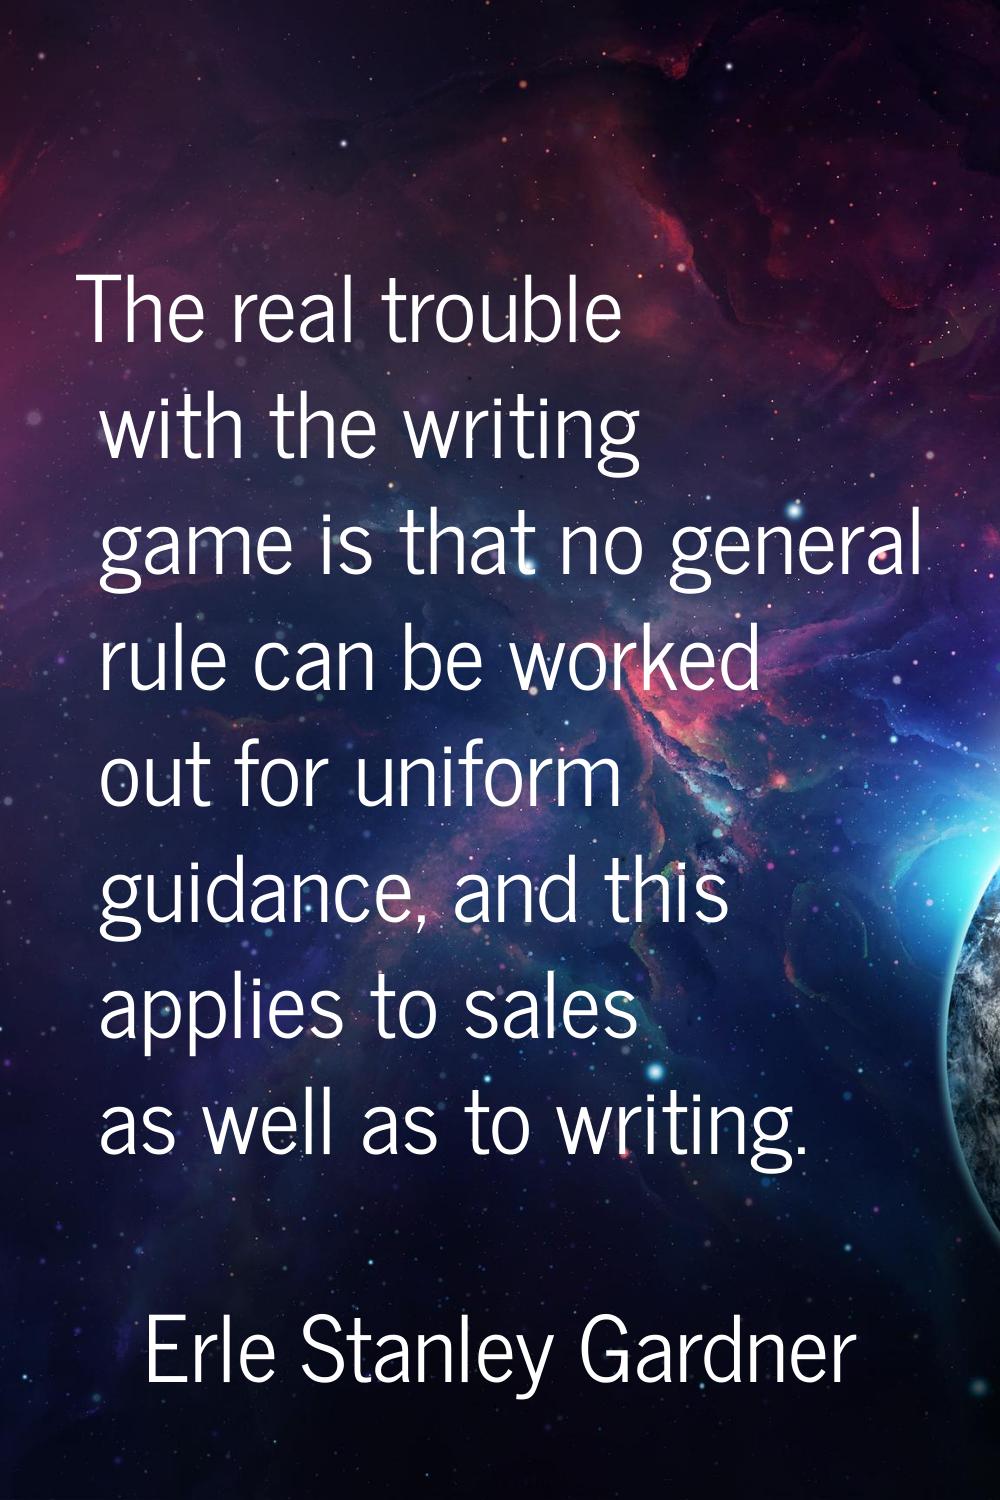 The real trouble with the writing game is that no general rule can be worked out for uniform guidan